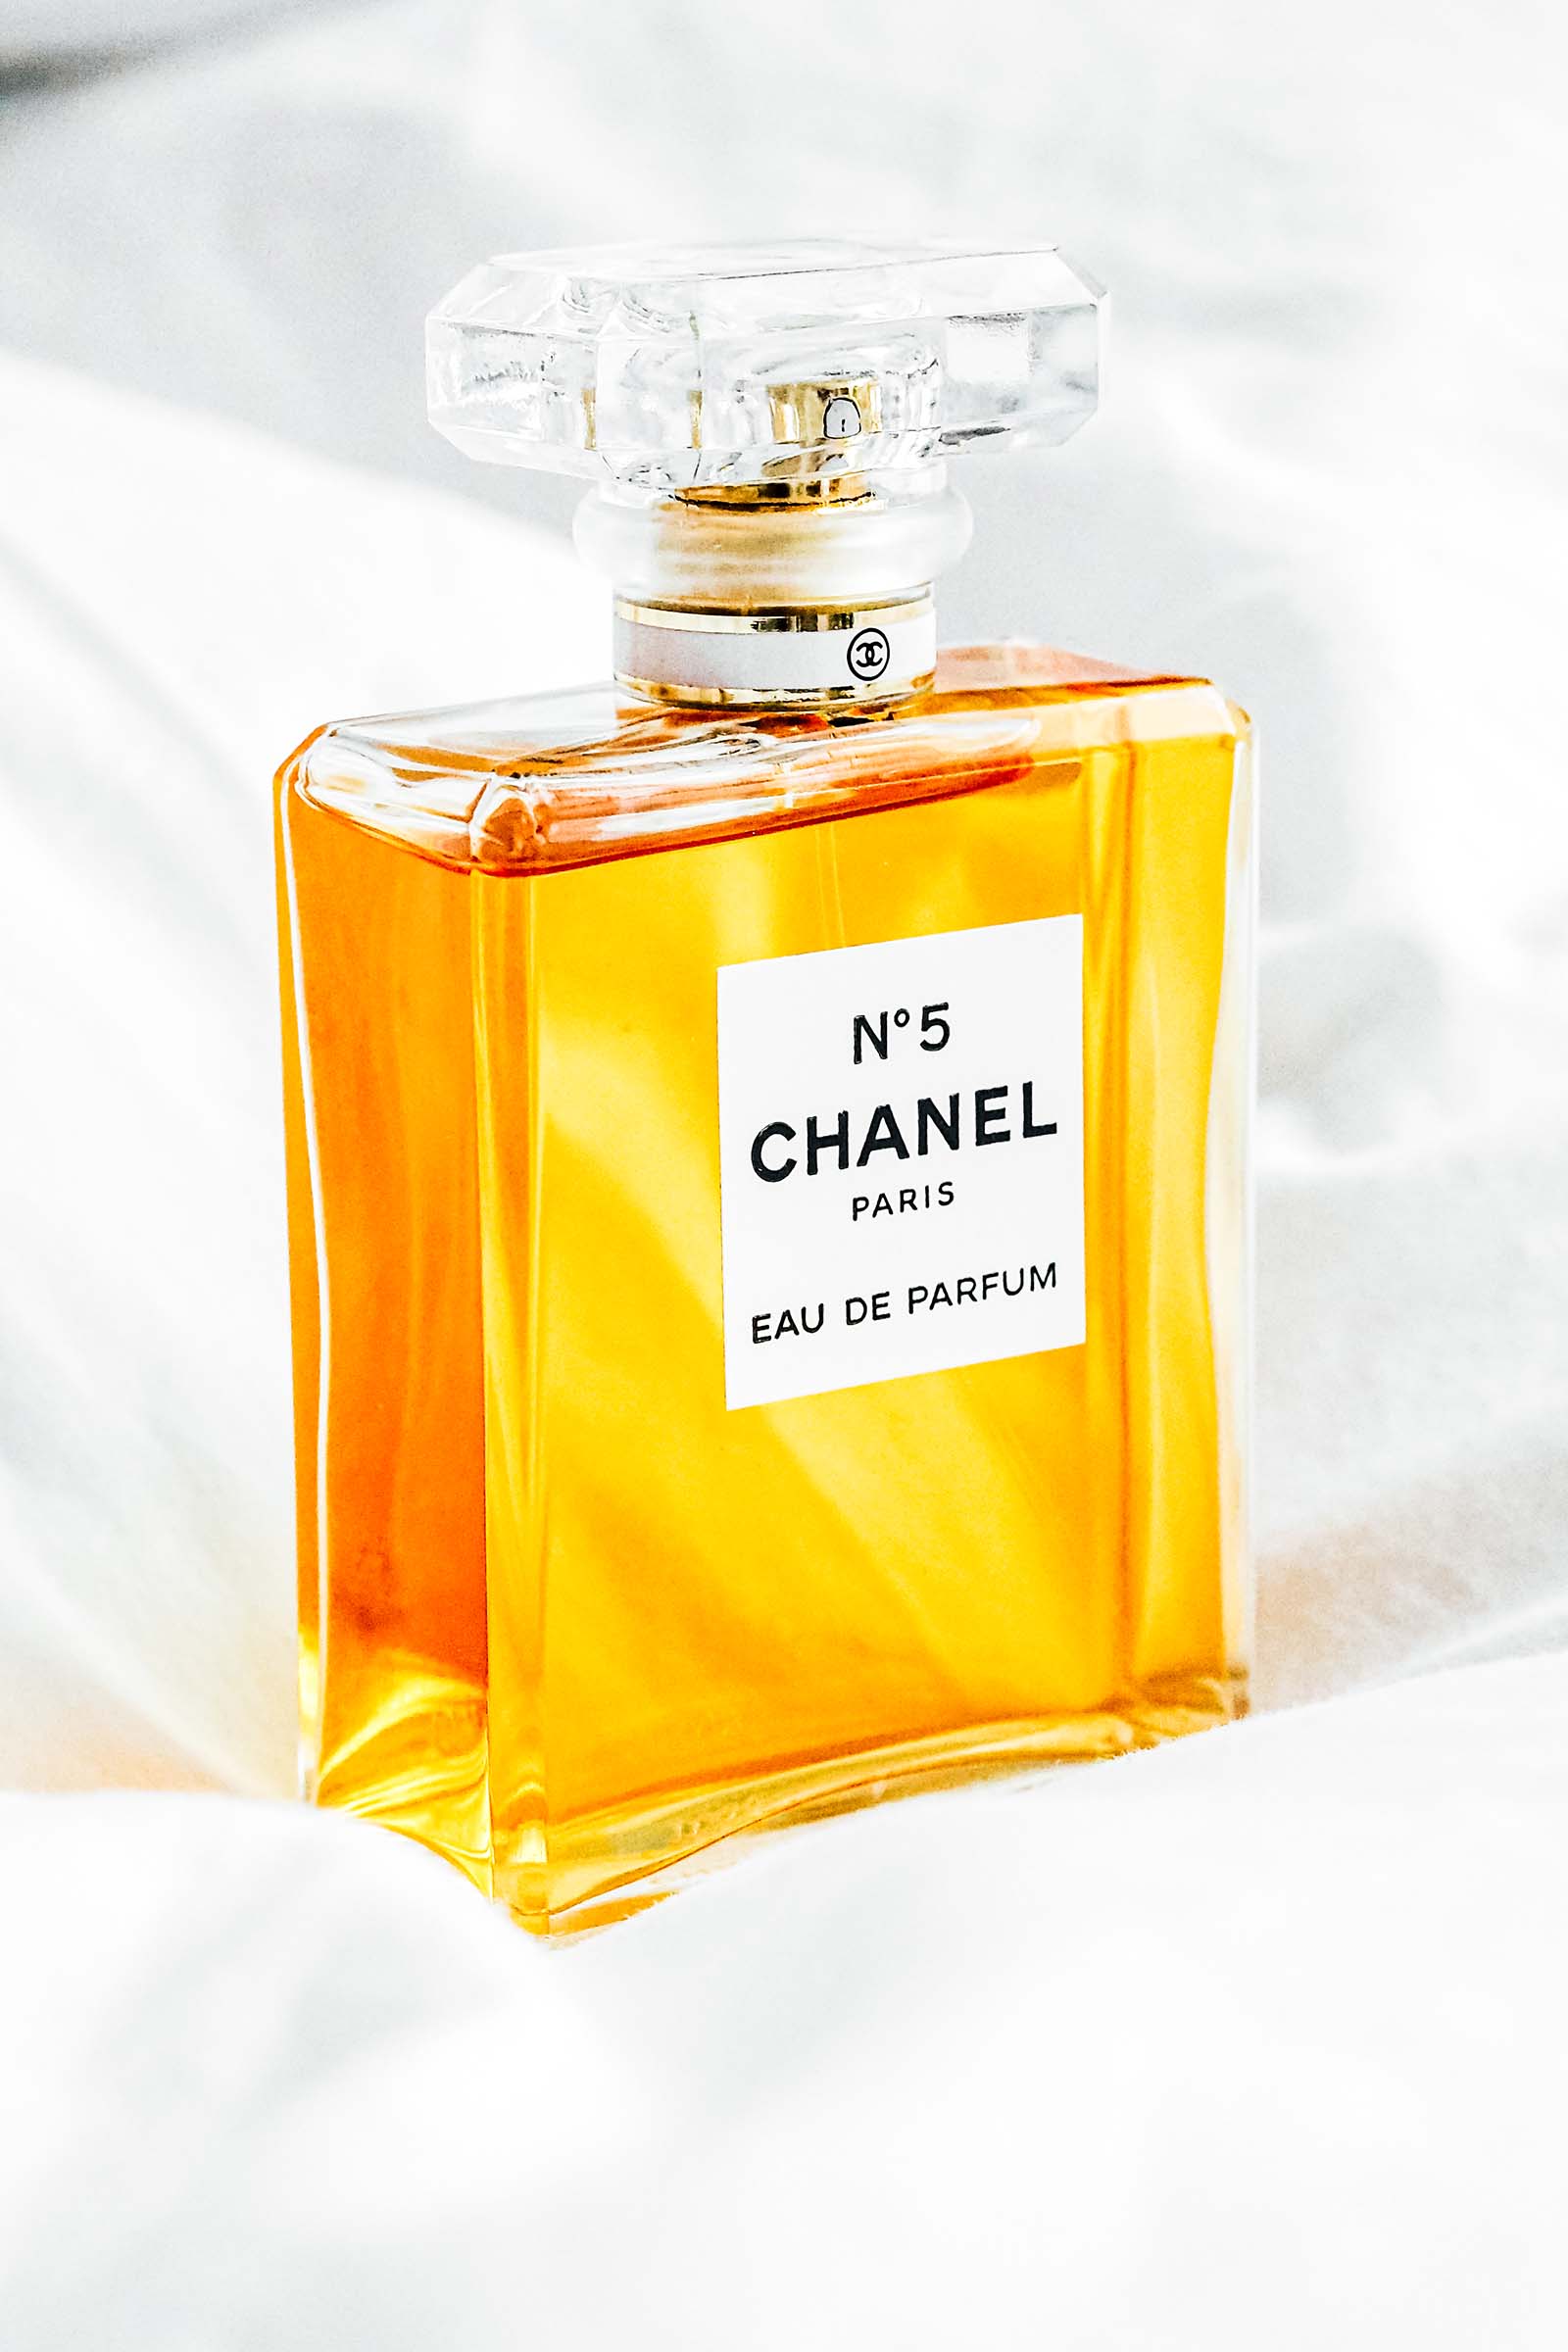 11 Secrets You Still Don T Know About Chanel No 5 Even Though It S Been 100 Years